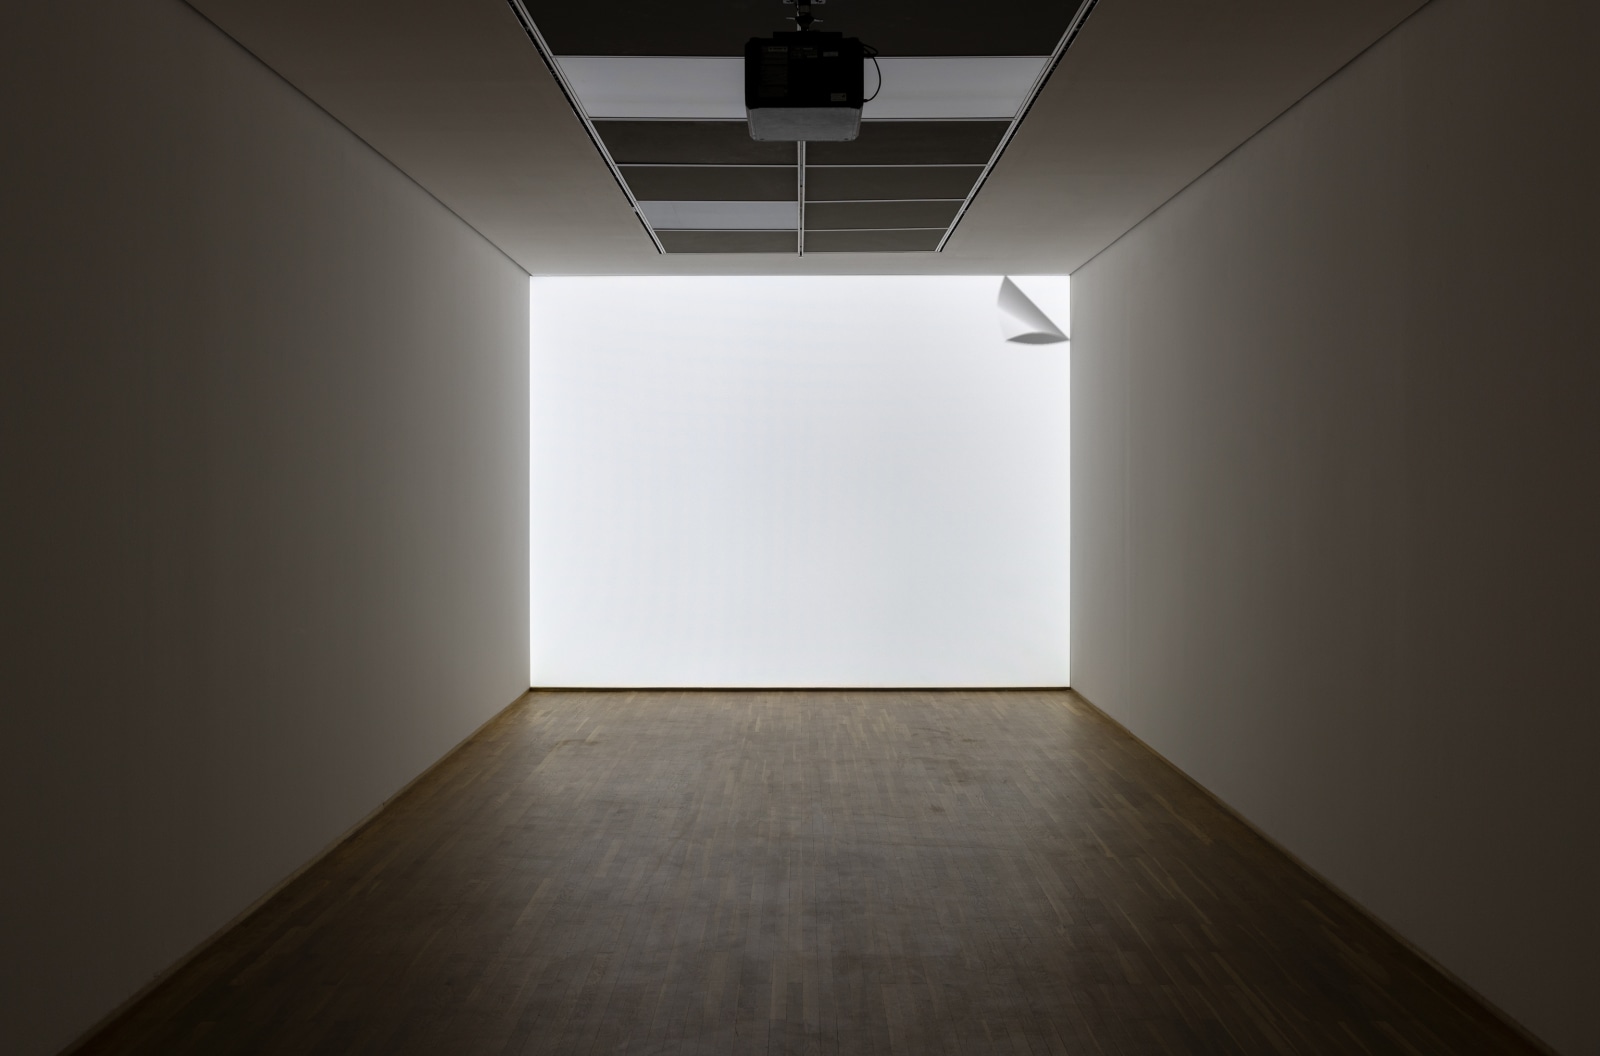 <div class="image_caption_container"><div class="image_caption"><p>Ceal Floyer, <strong>Peel</strong>, 2003, DVD-projection/installation (silent loop), DVD, DVD-player, projector. Exhibition view: <strong>Under Construction, New Acquisitions for the Nationalgalerie’s Collection</strong>, Hamburger Bahnhof, Berlin, 2022. Photo © Andrea Rossetti</p></div></div>